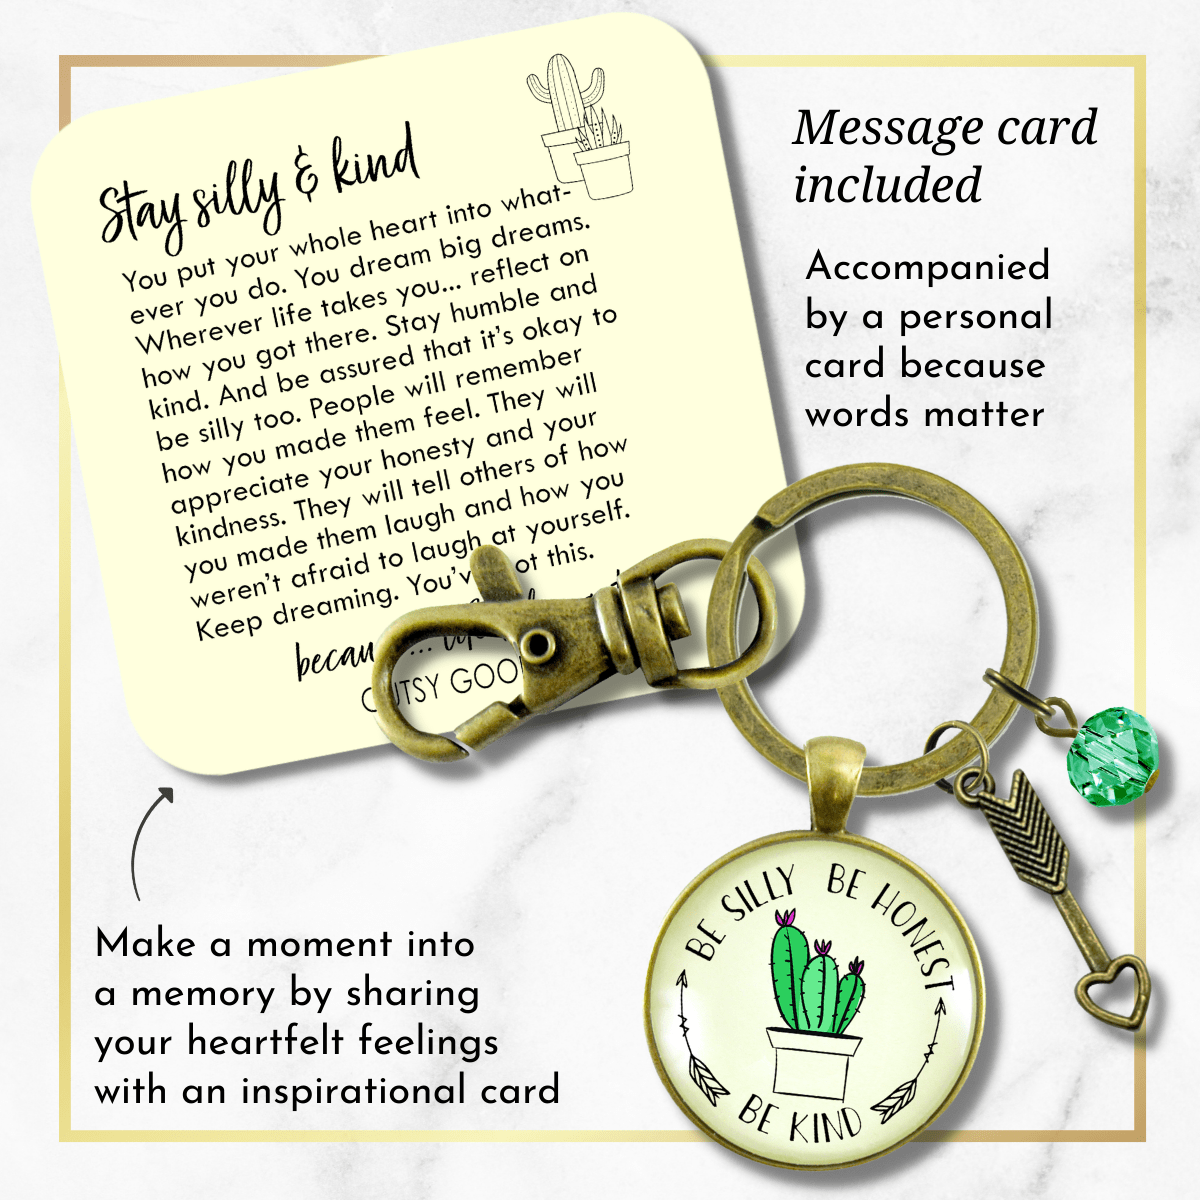 Kindness Keychain Be Silly Be Honest Be Kind Womens Jewelry Friendship Cactus Boho Chic - Gutsy Goodness Handmade Jewelry;Kindness Keychain Be Silly Be Honest Be Kind Womens Jewelry Friendship Cactus Boho Chic - Gutsy Goodness Handmade Jewelry Gifts